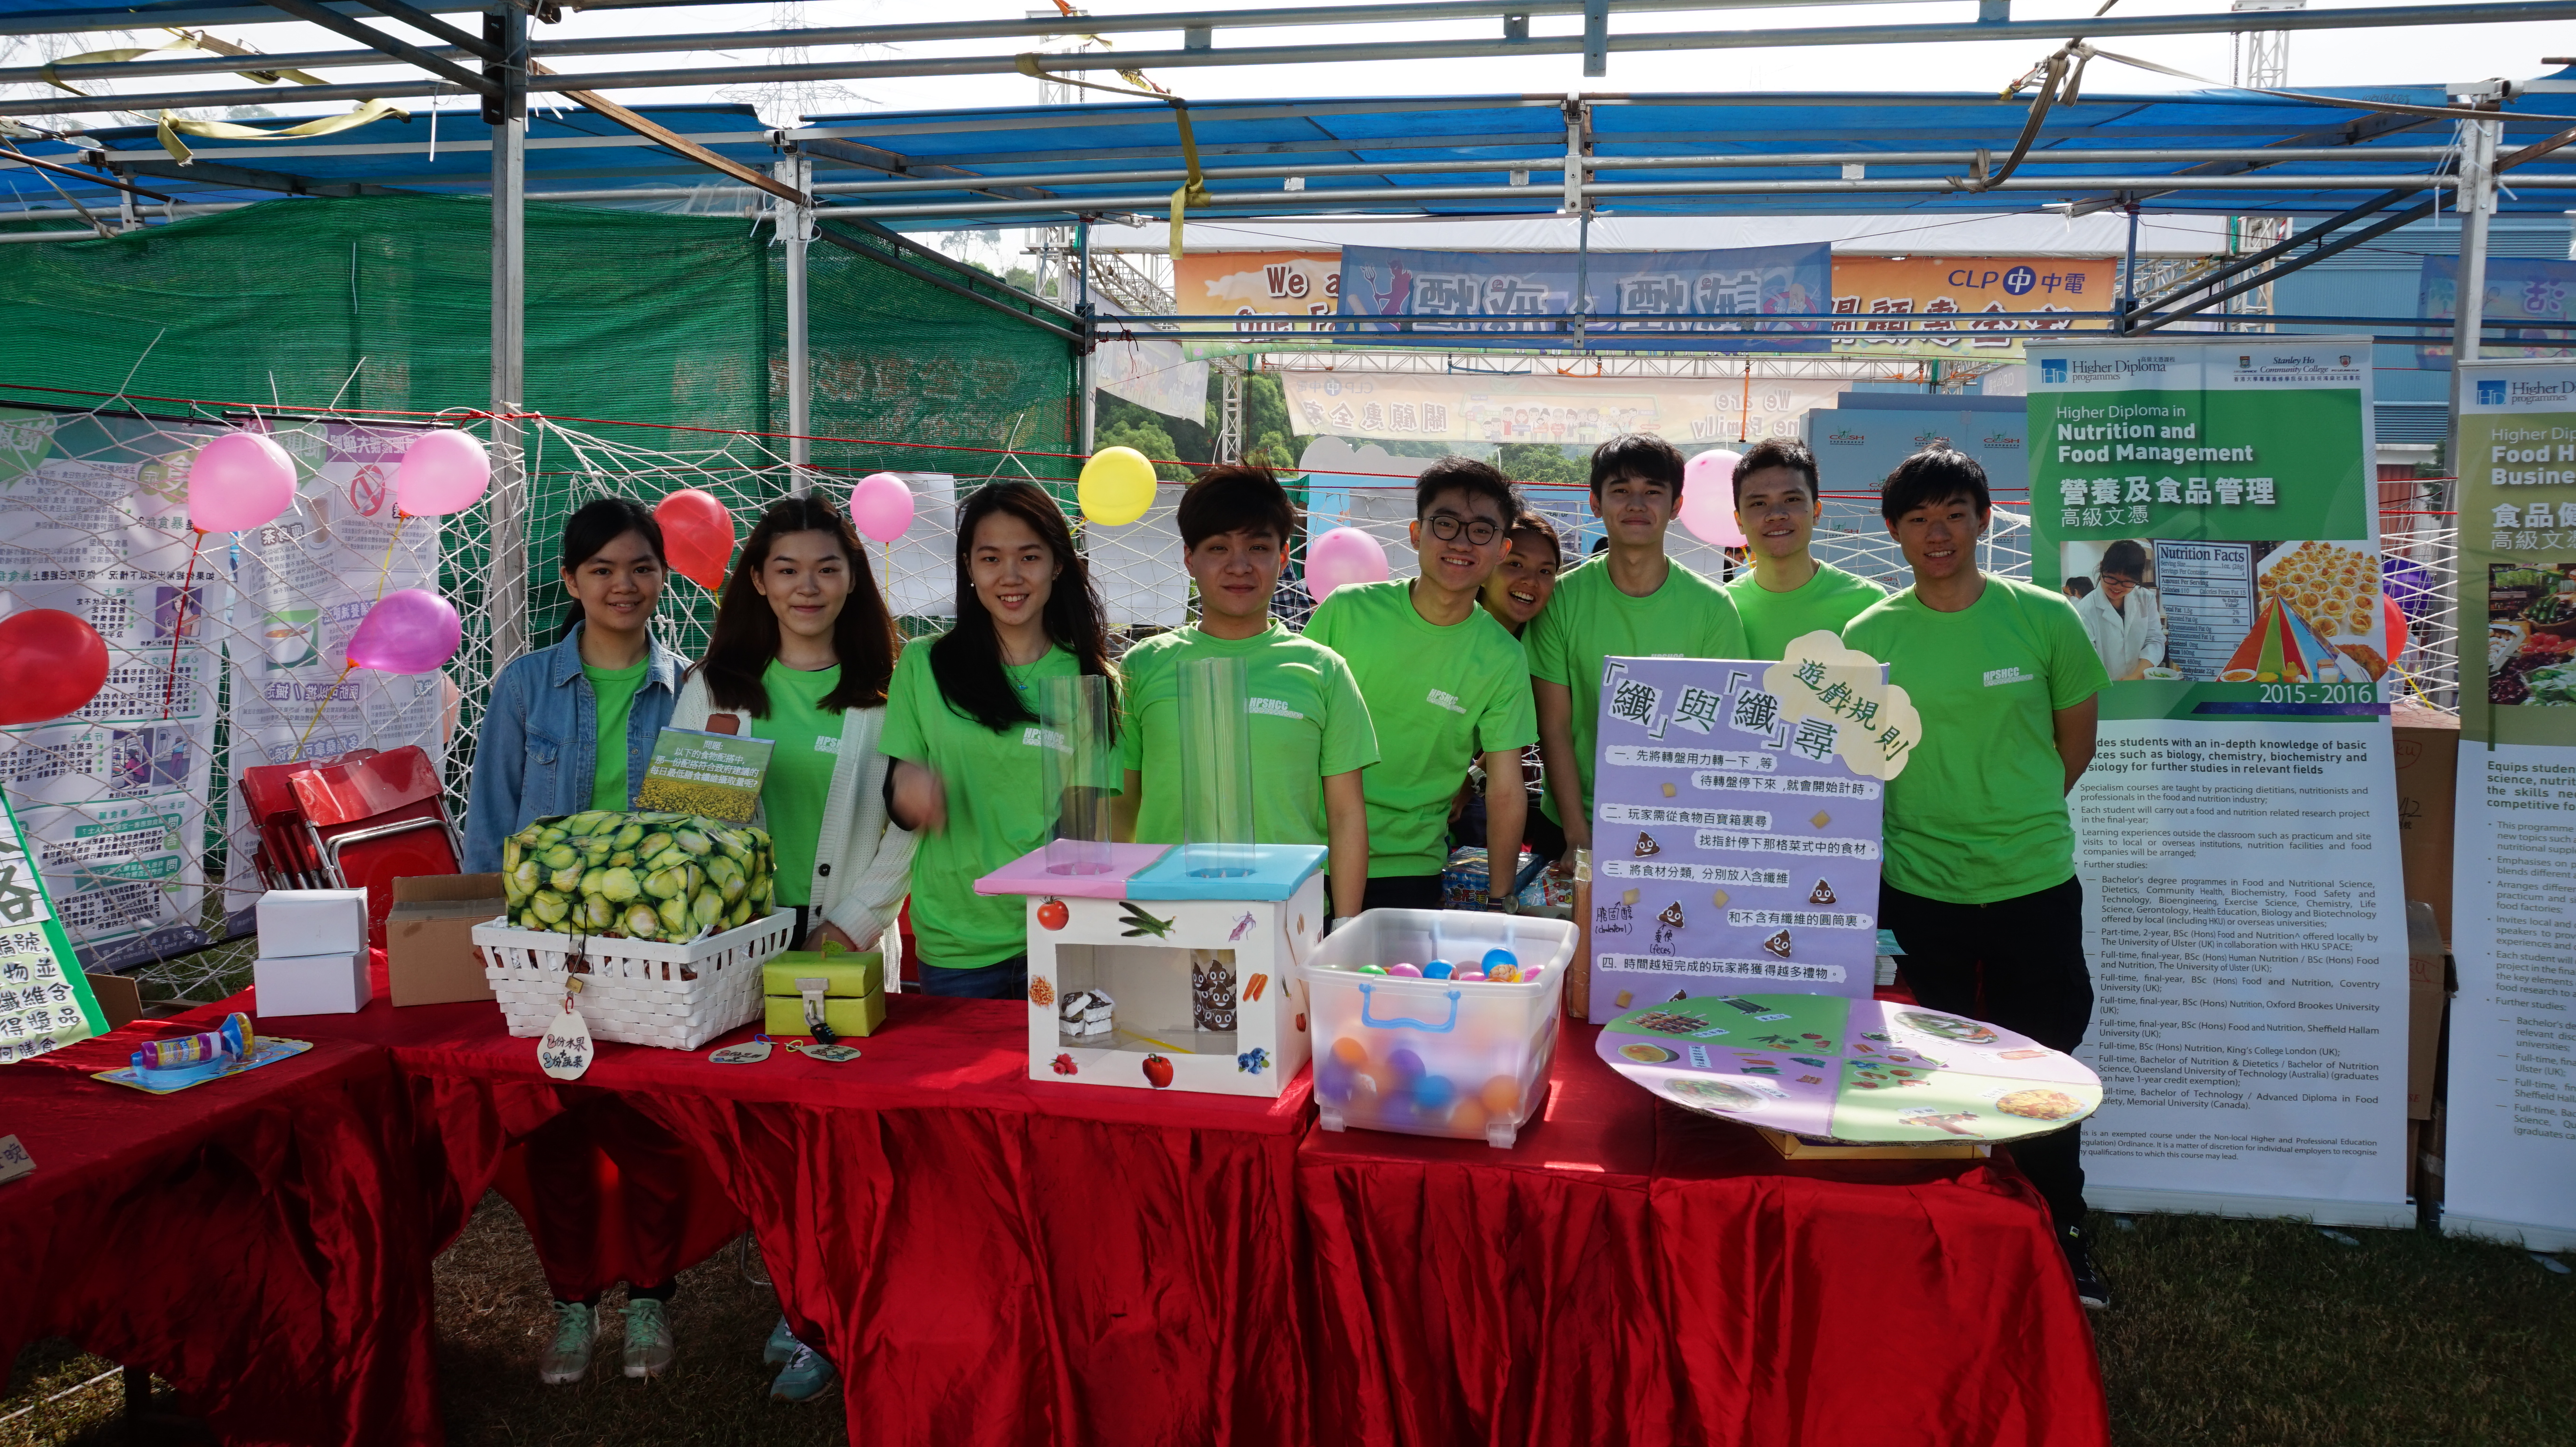 CLP Safety, Health & Environment (SHE) Day - Photo - 1